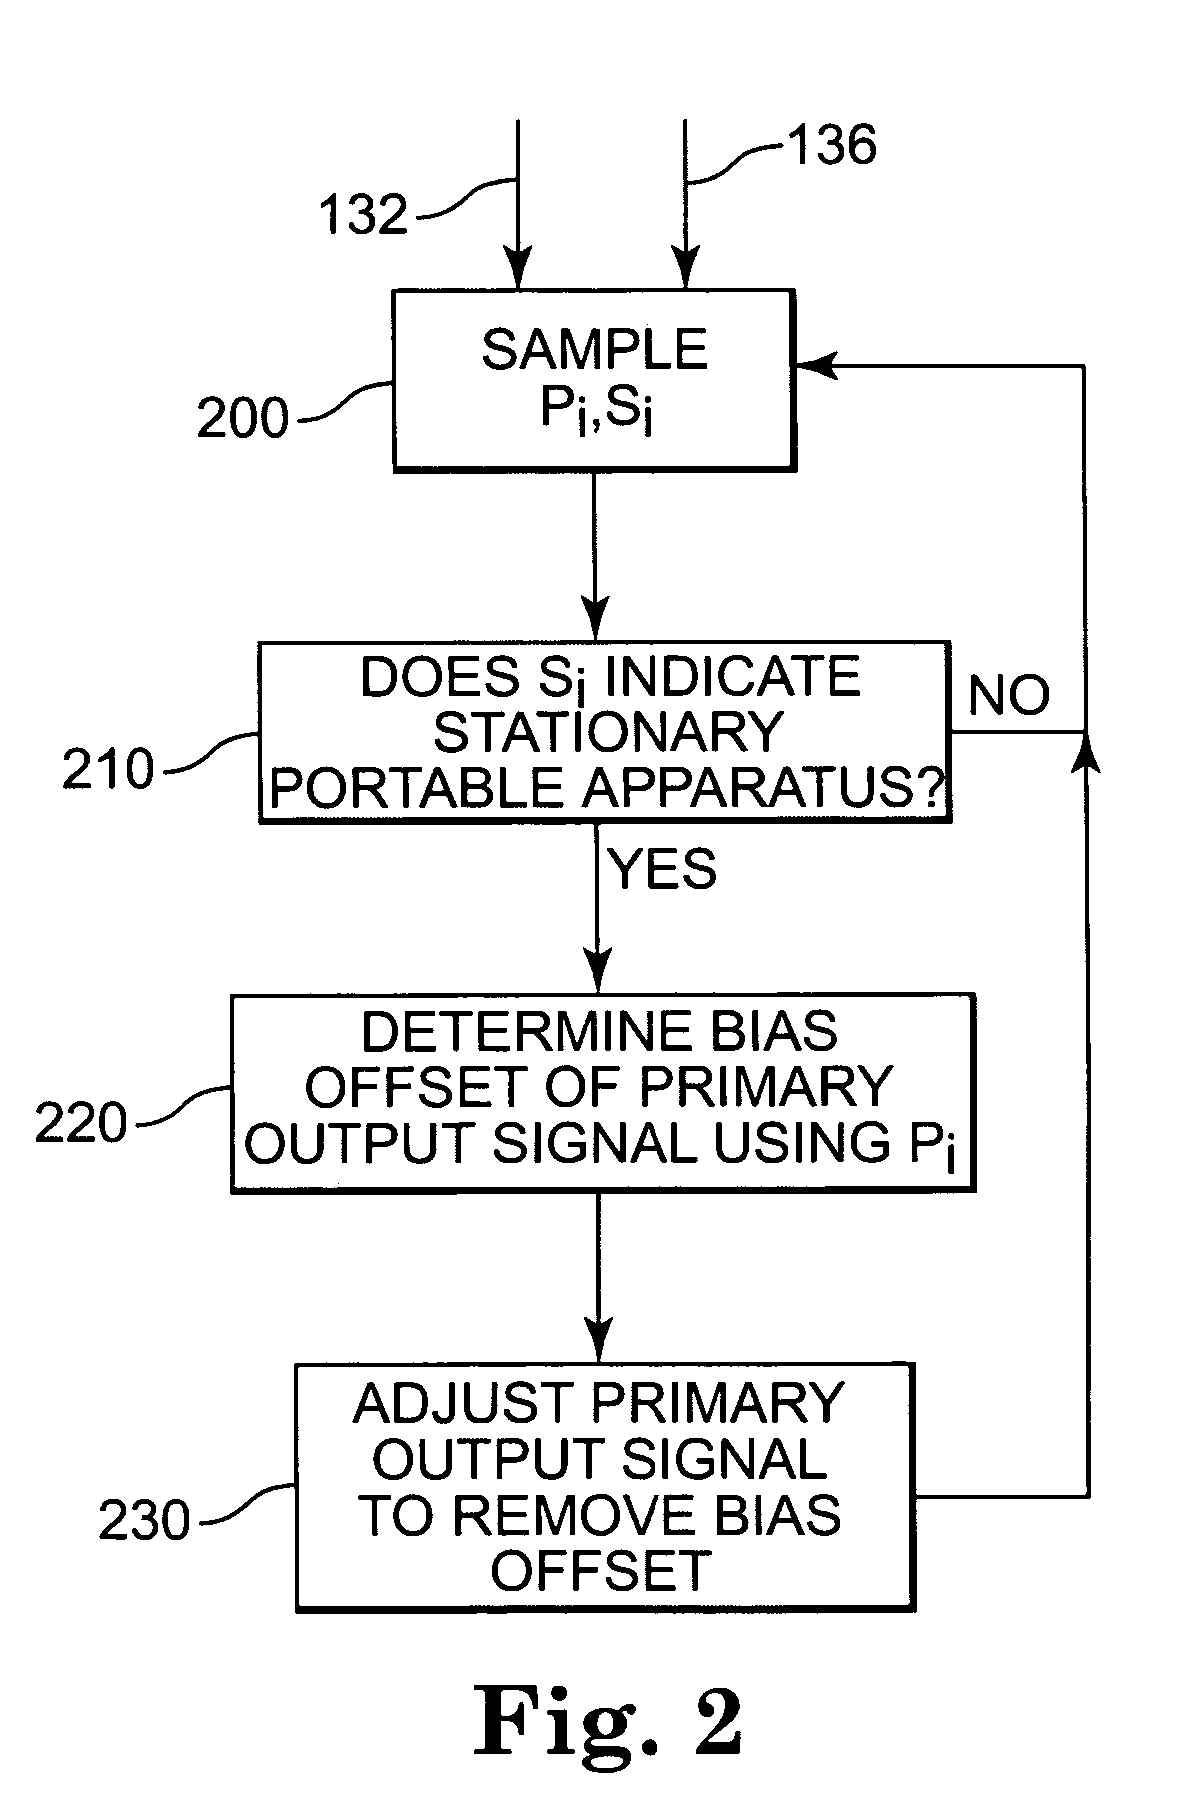 Method and apparatus for calibration of a motion sensing device in a portable apparatus